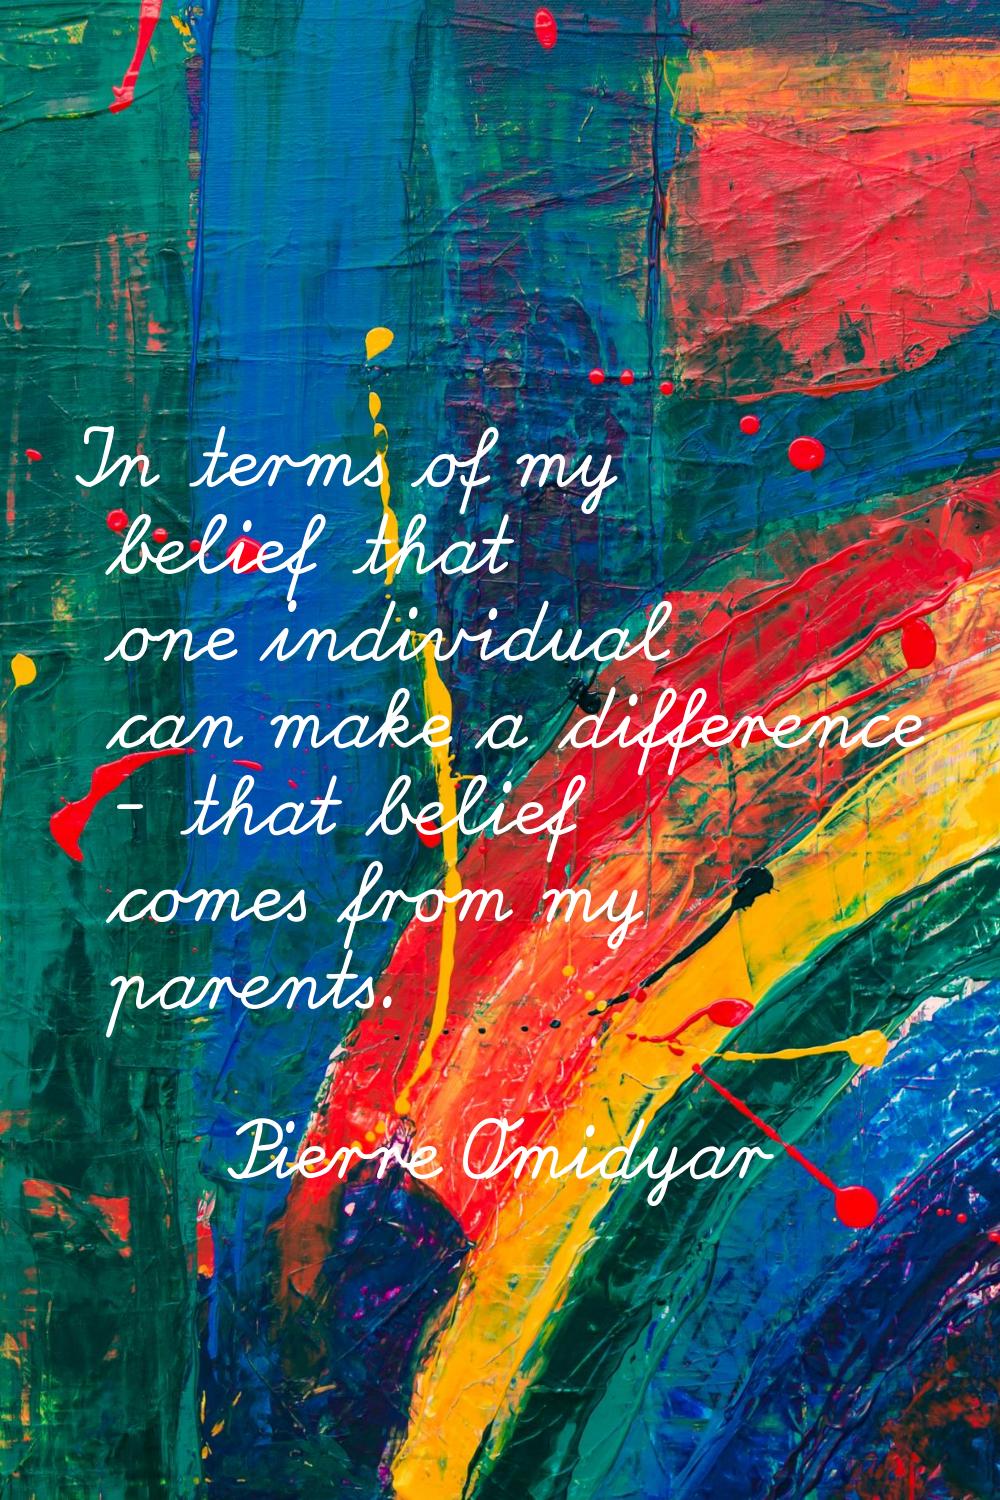 In terms of my belief that one individual can make a difference - that belief comes from my parents